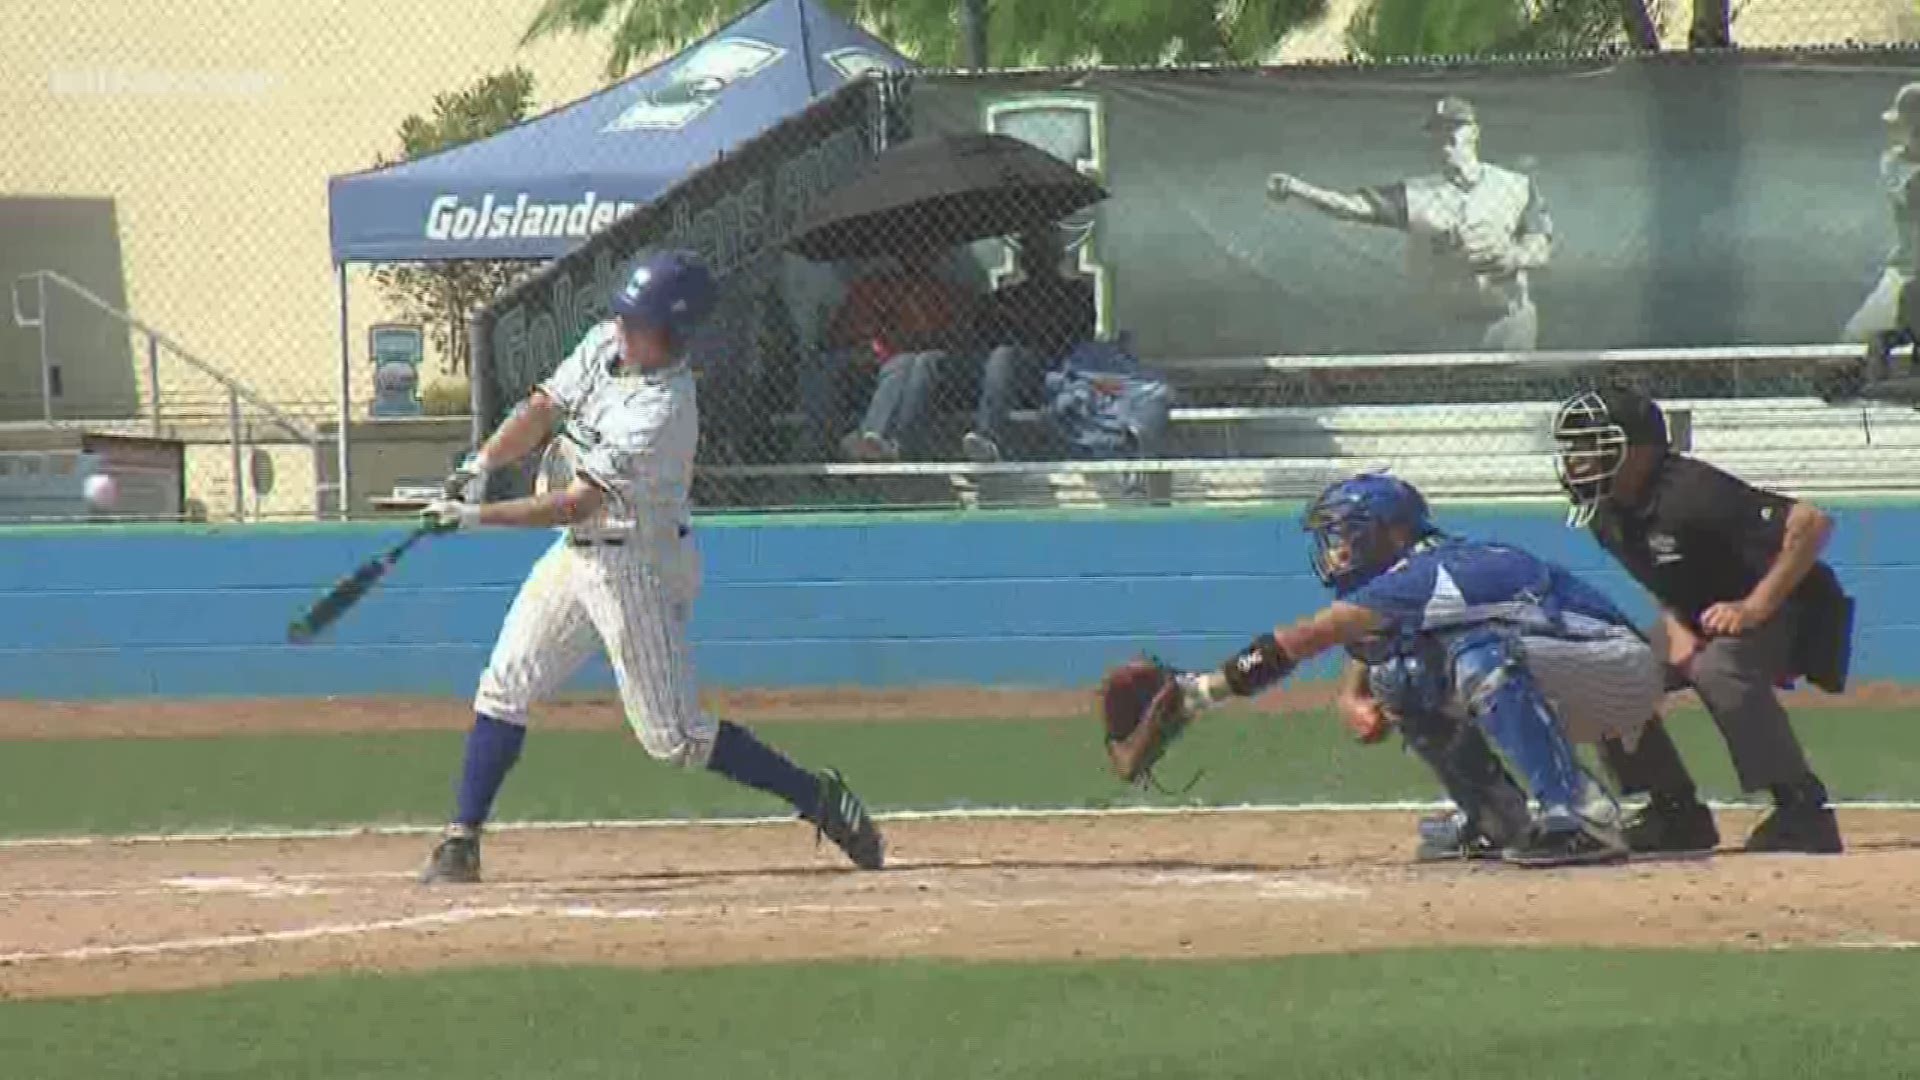 Texas A&M-Corpus Christi baseball picked up a pair of wins in it's wild Saturday where the team had to finish game one of it's three game series, then follow that up with a doubleheader.